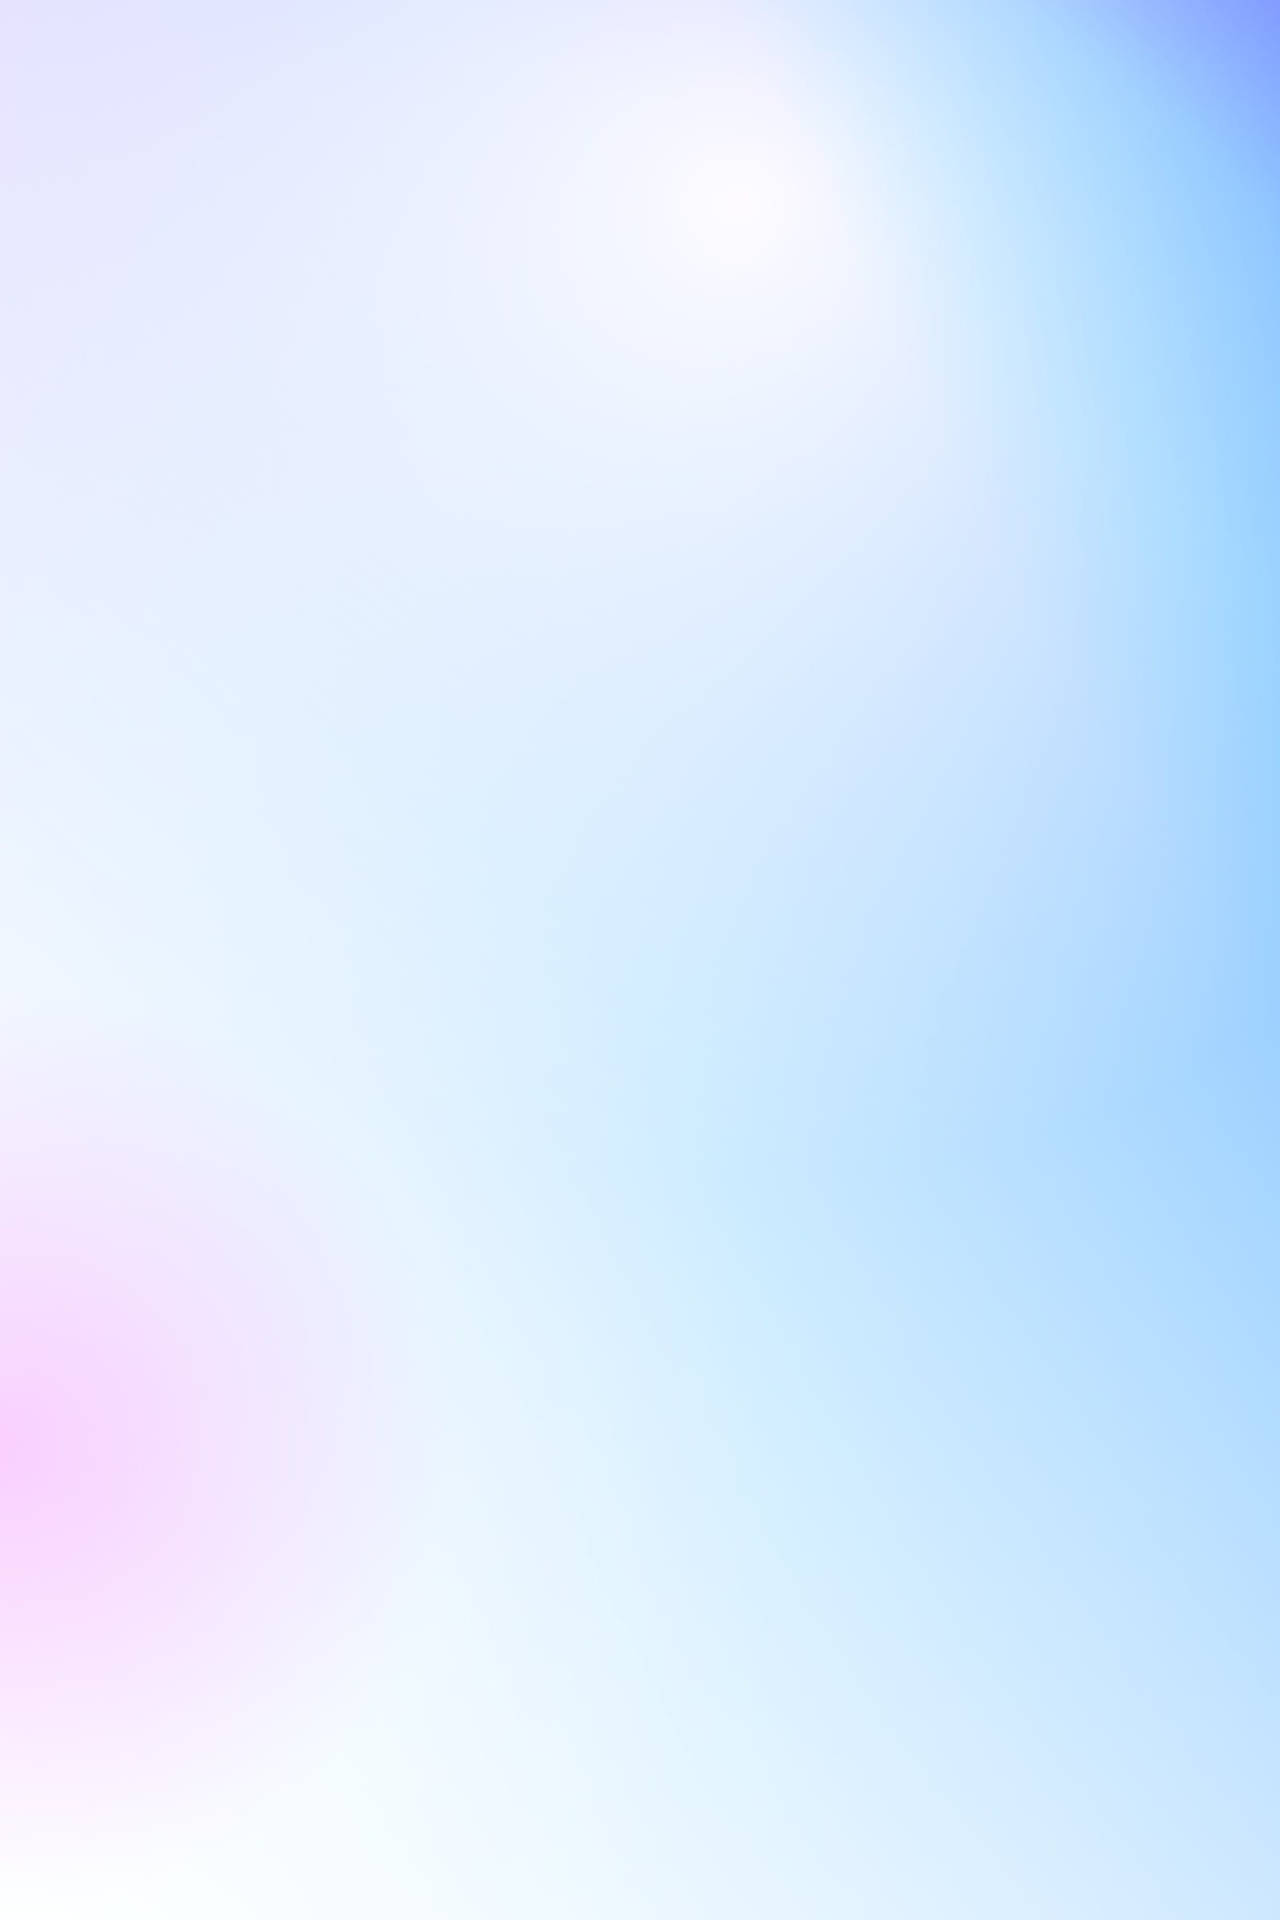 Pastel Phone Pink And Blue Gradient Background